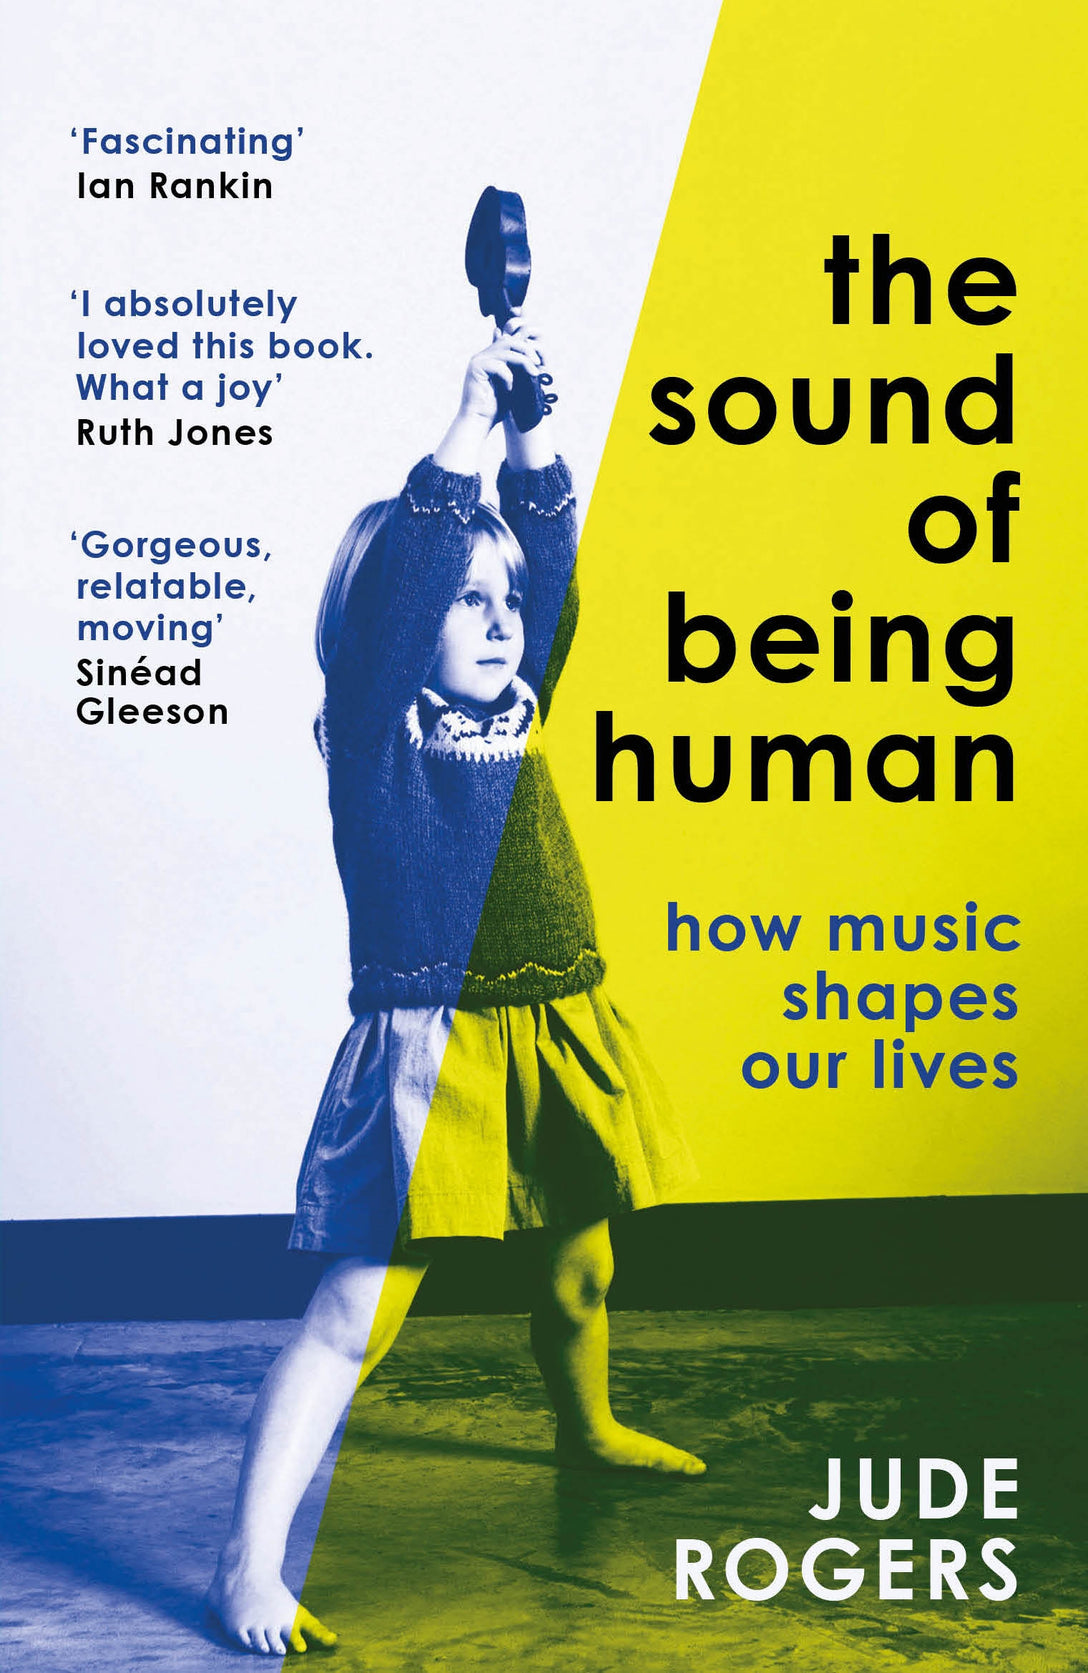 The Sound of Being Human by Jude Rogers